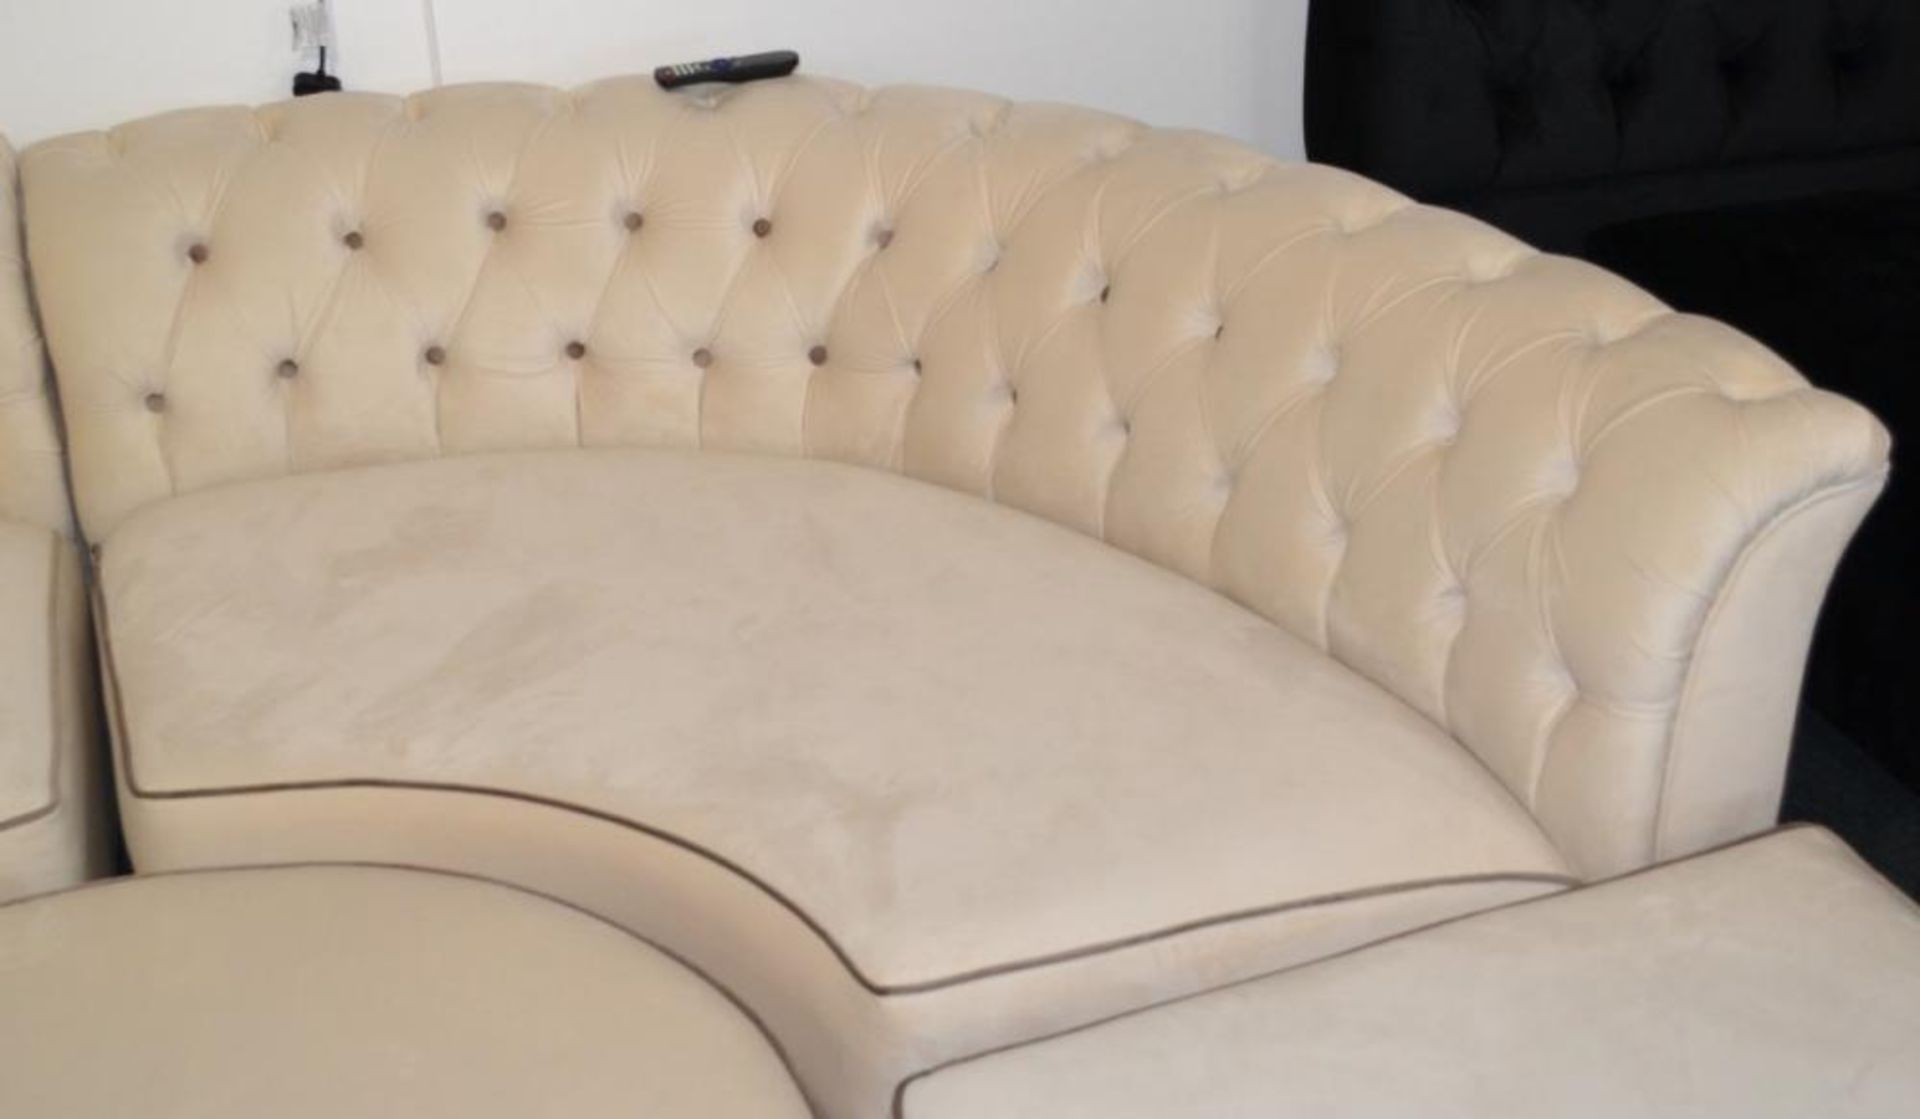 1 x Luxurious Bespoke Cream Velour 5 Piece Sofa Set. A truly beautiful bespoke piece that will give - Image 4 of 8